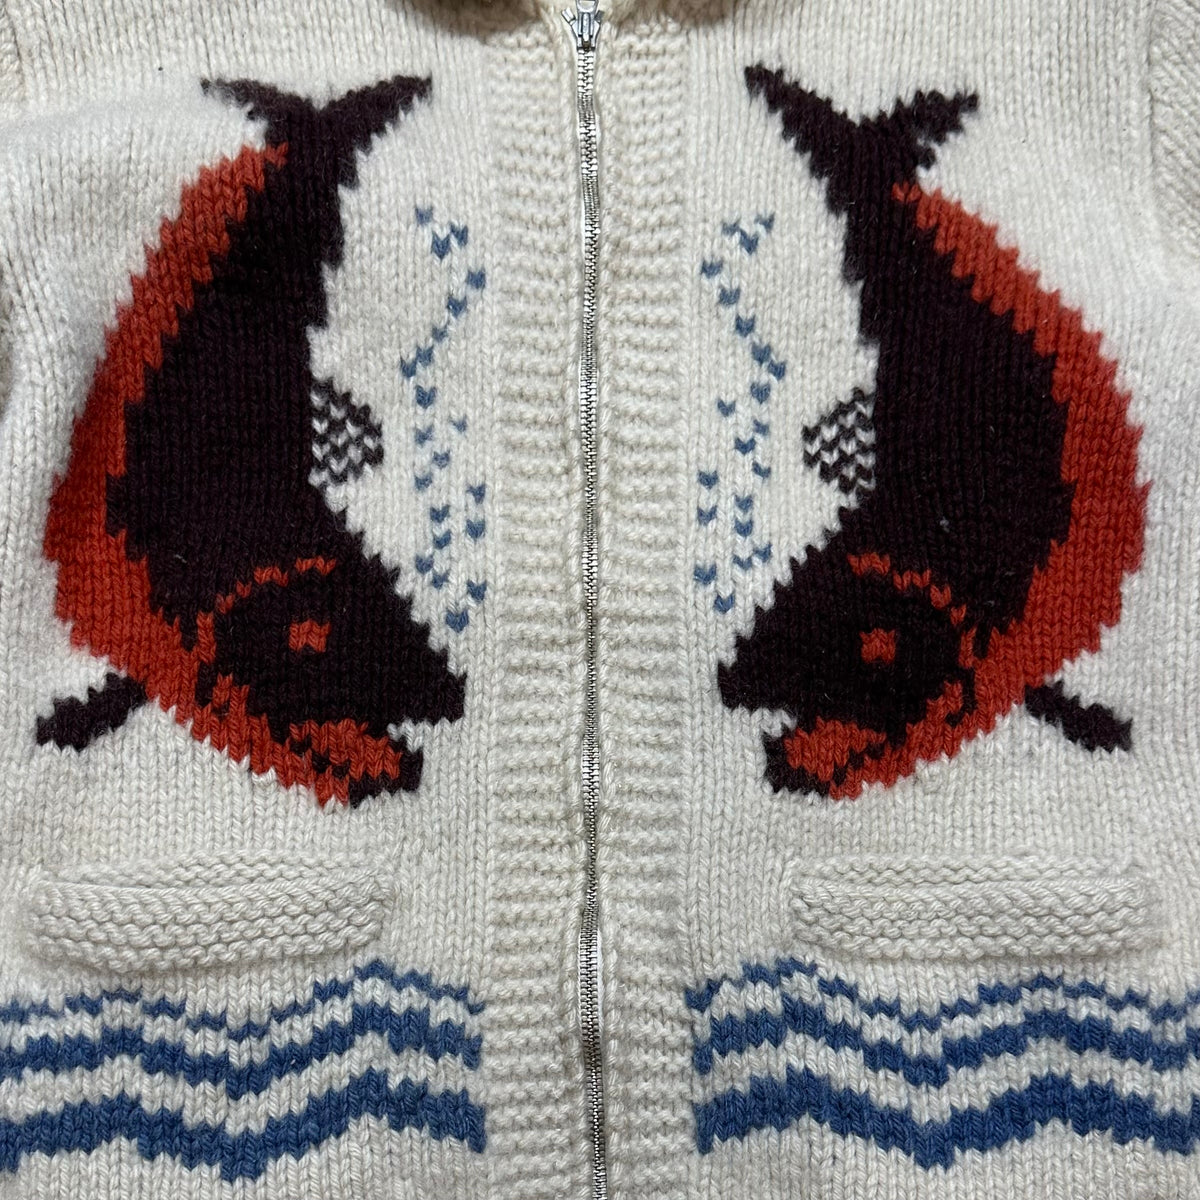 Vintage 1960's Mary Maxim Fish Cowichan Hand Knit Wool Sweater